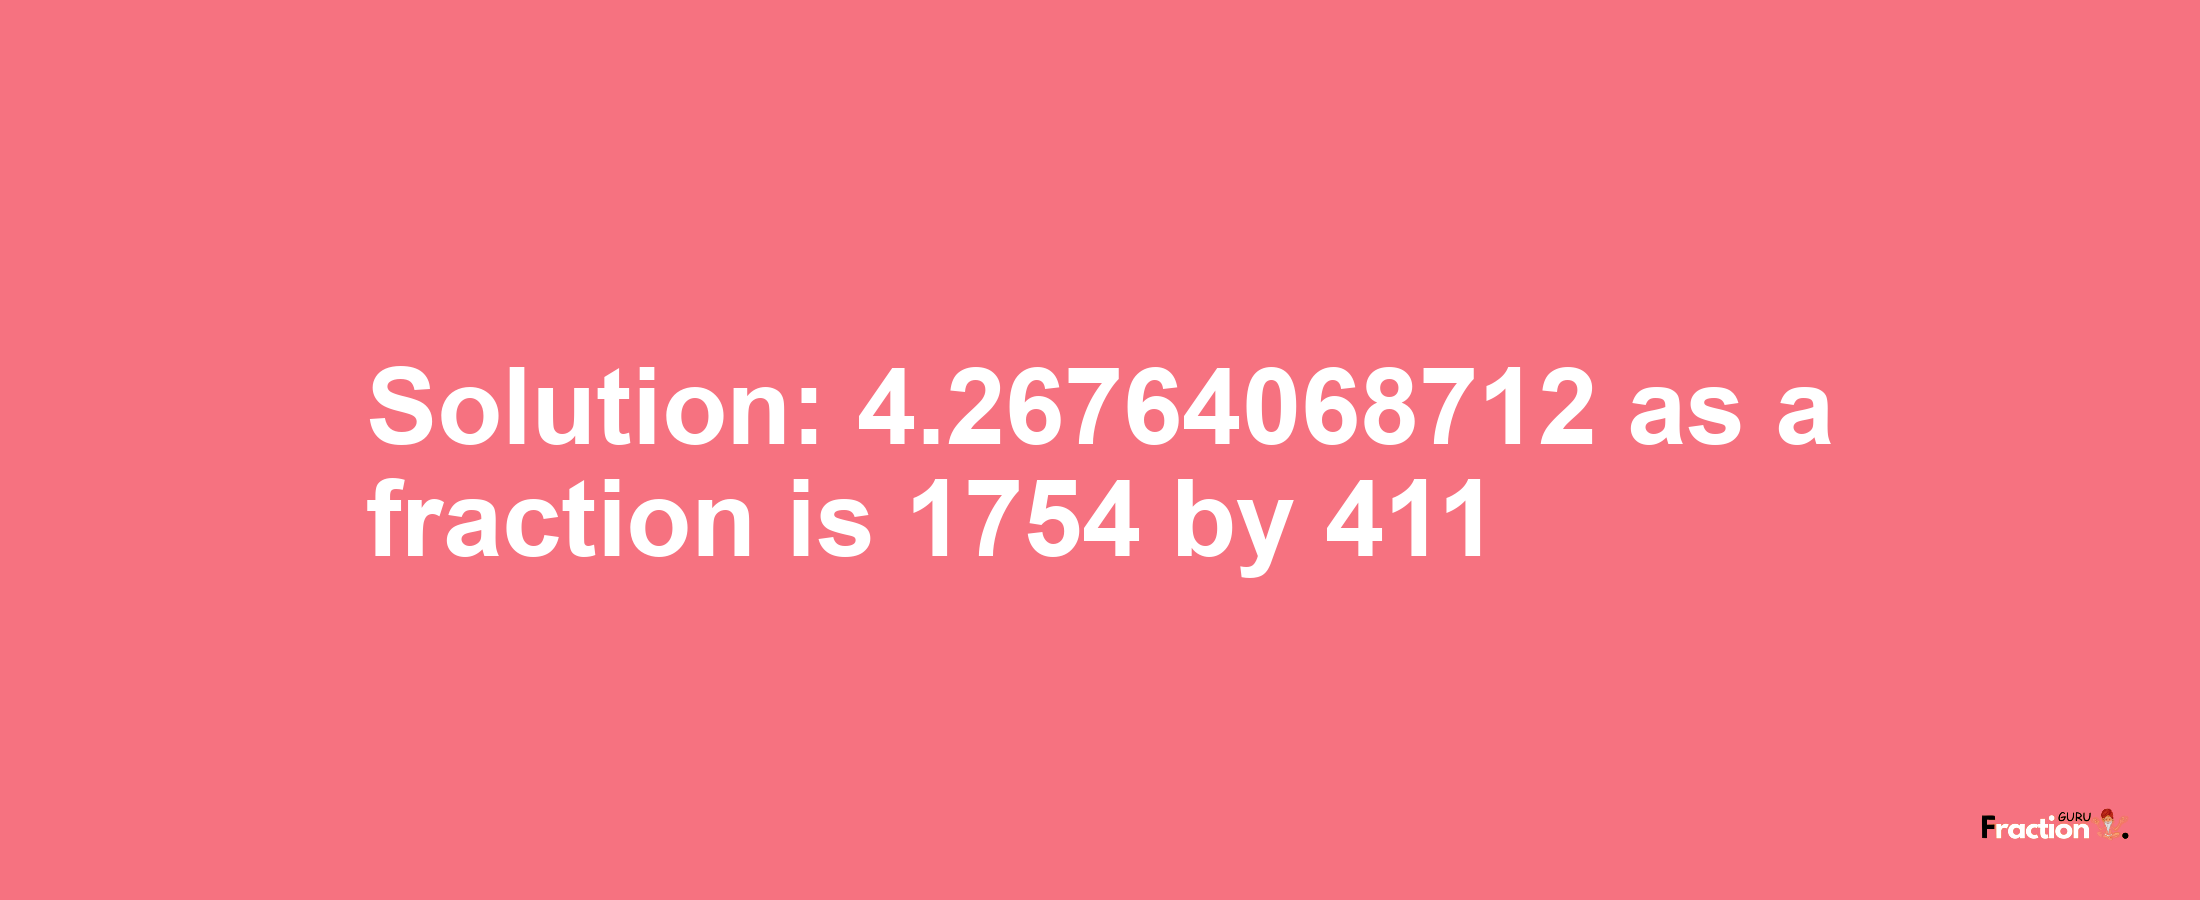 Solution:4.26764068712 as a fraction is 1754/411